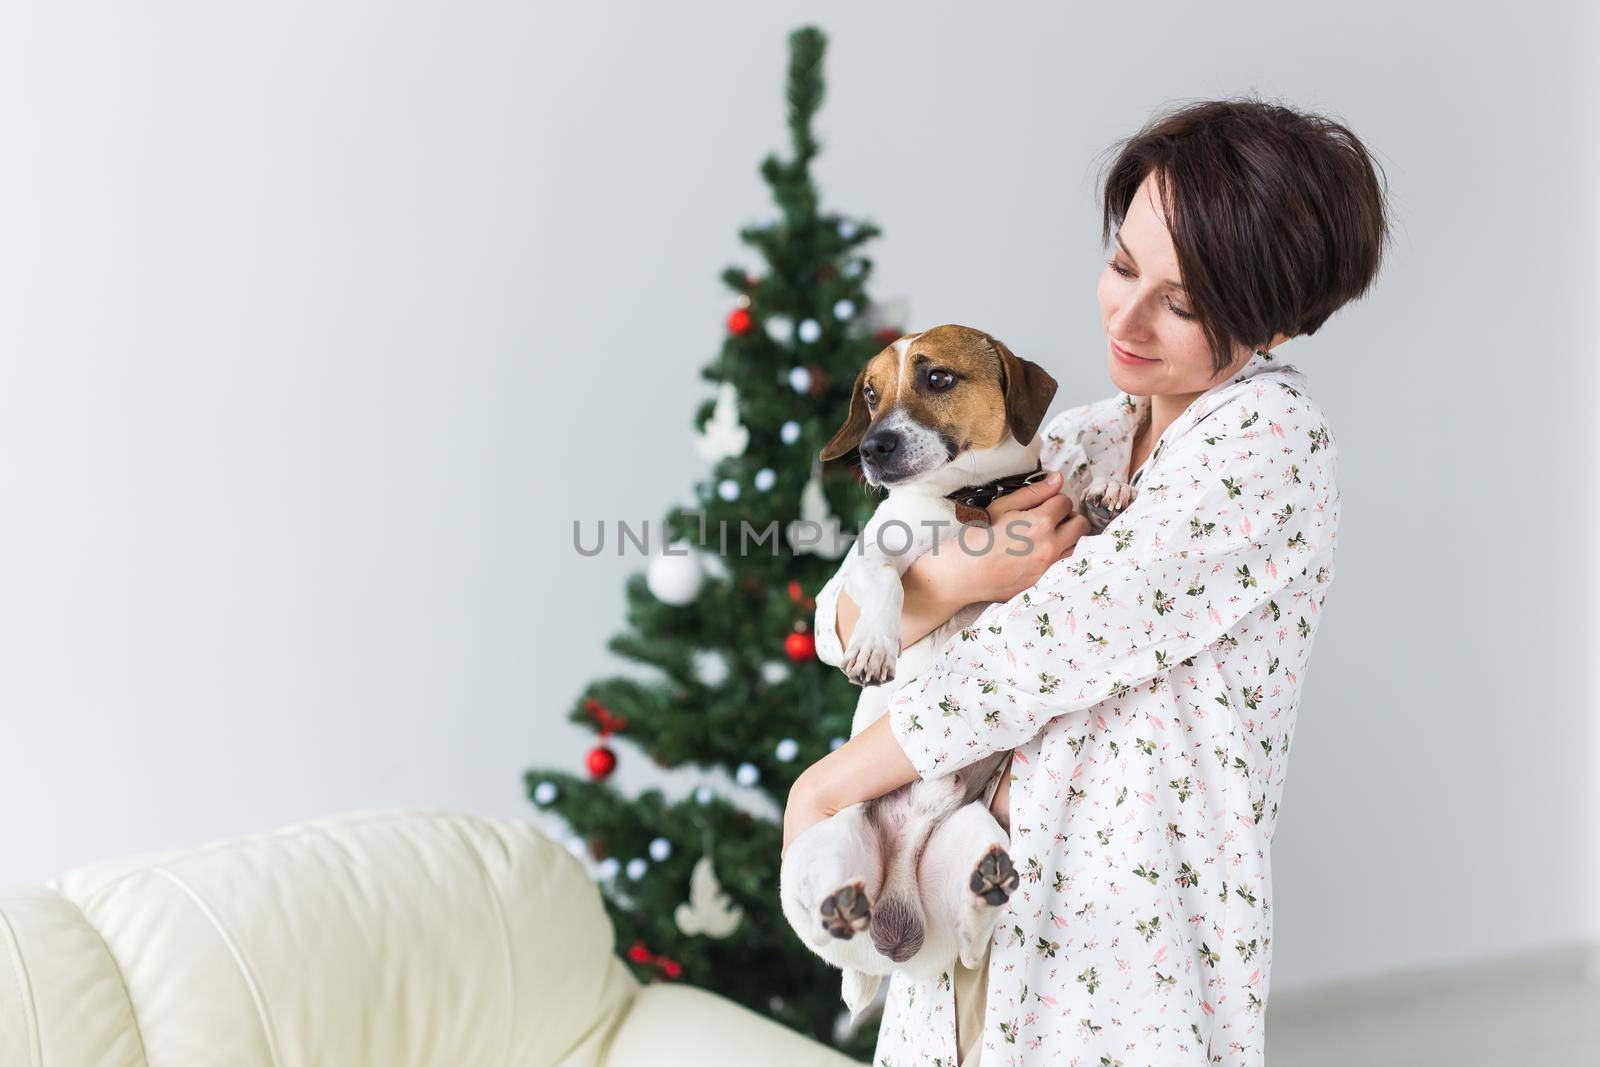 Happy woman with dog. Christmas tree with presents under it. Decorated living room.